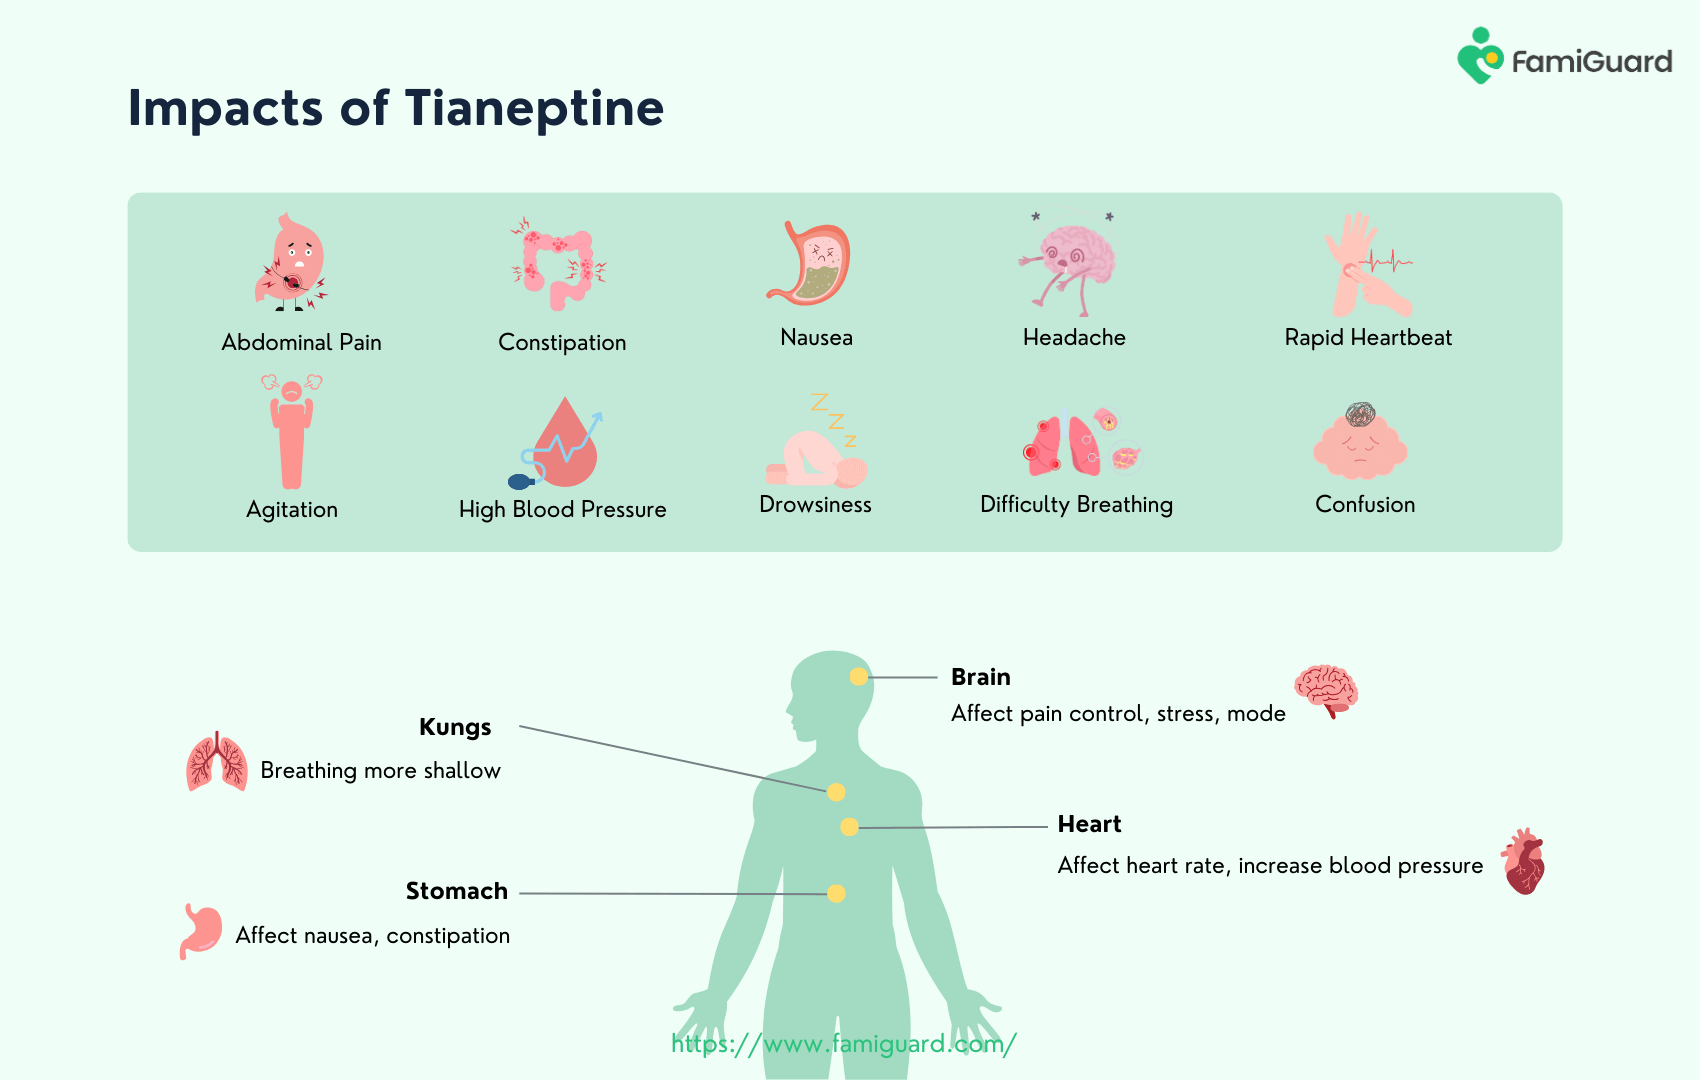 Impacts of Tianeptine